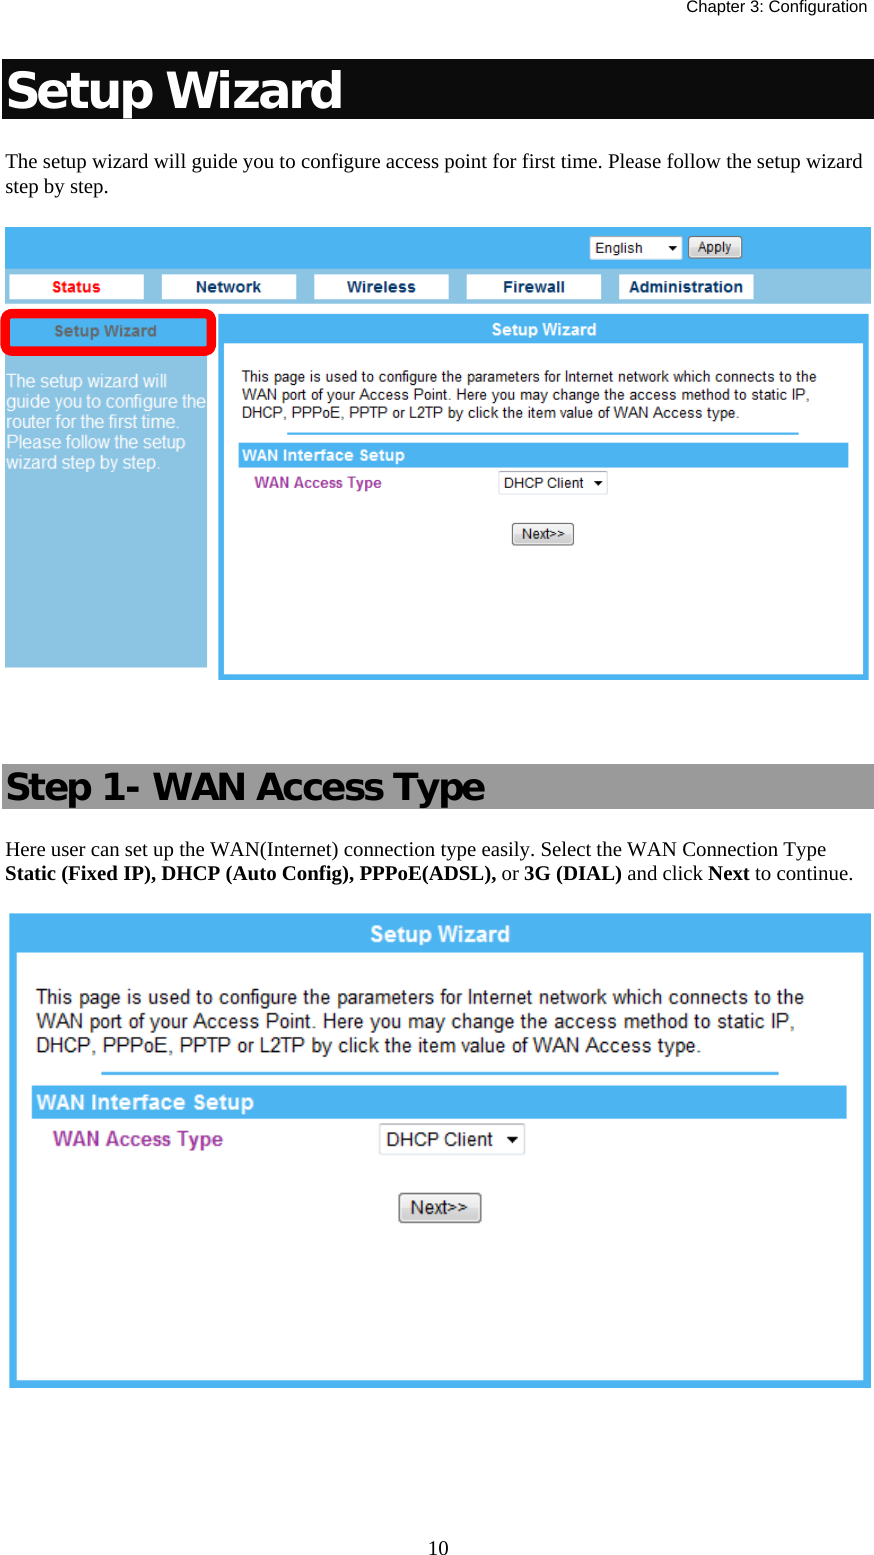   Chapter 3: Configuration  10Setup Wizard The setup wizard will guide you to configure access point for first time. Please follow the setup wizard step by step.   Step 1- WAN Access Type Here user can set up the WAN(Internet) connection type easily. Select the WAN Connection Type Static (Fixed IP), DHCP (Auto Config), PPPoE(ADSL), or 3G (DIAL) and click Next to continue.      